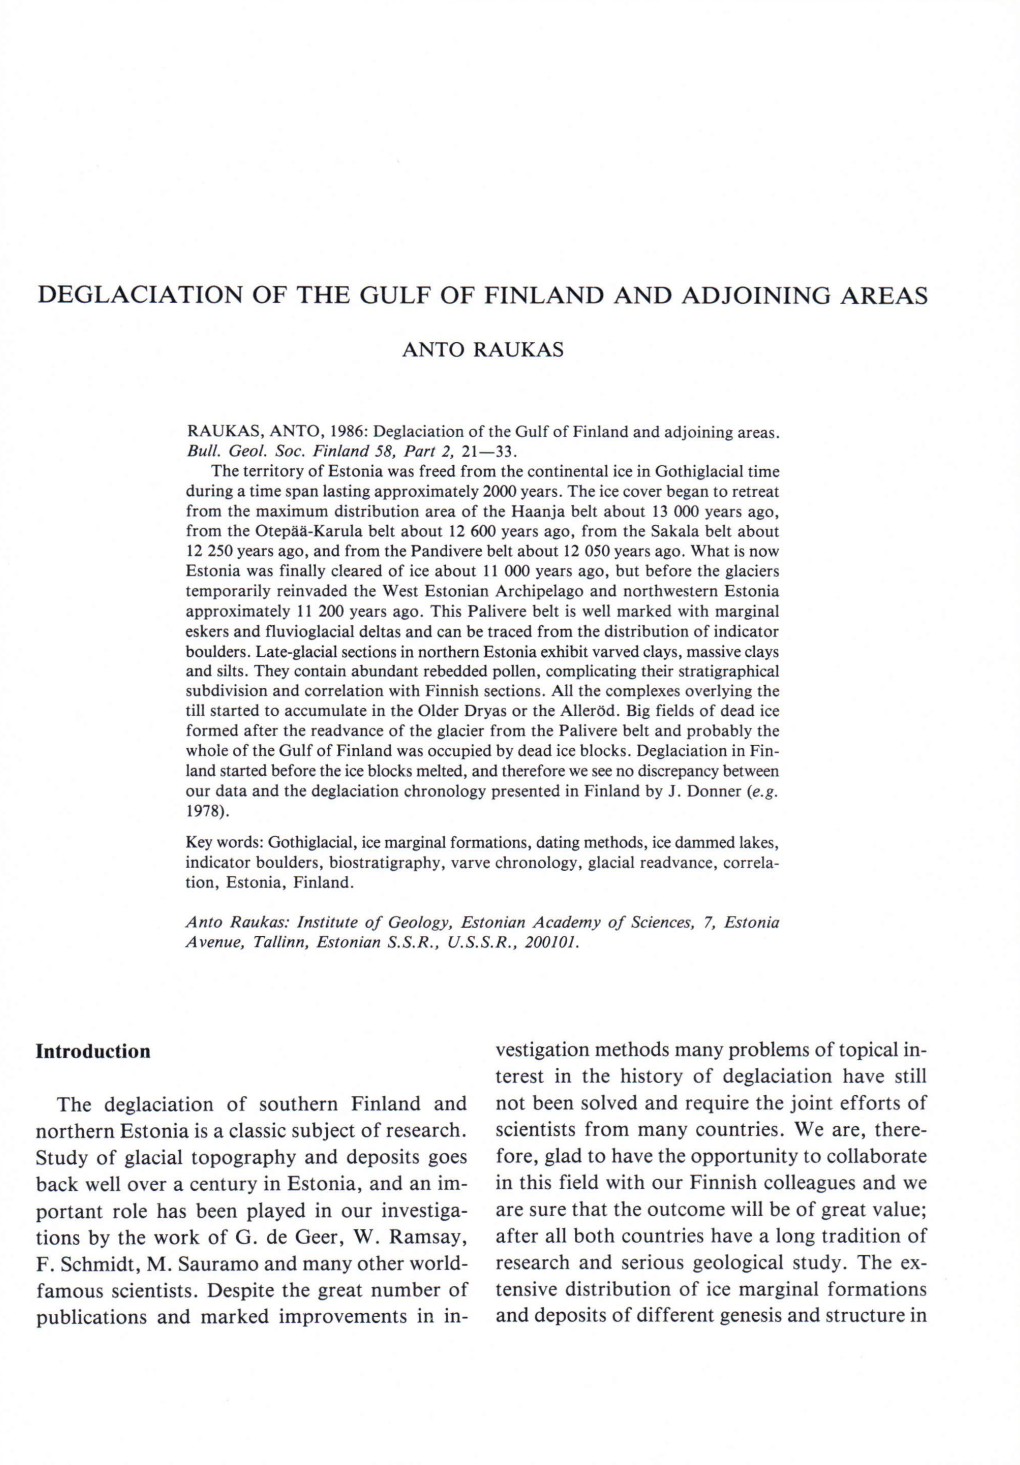 Deglaciation of the Gulf of Finland and Adjoining Areas